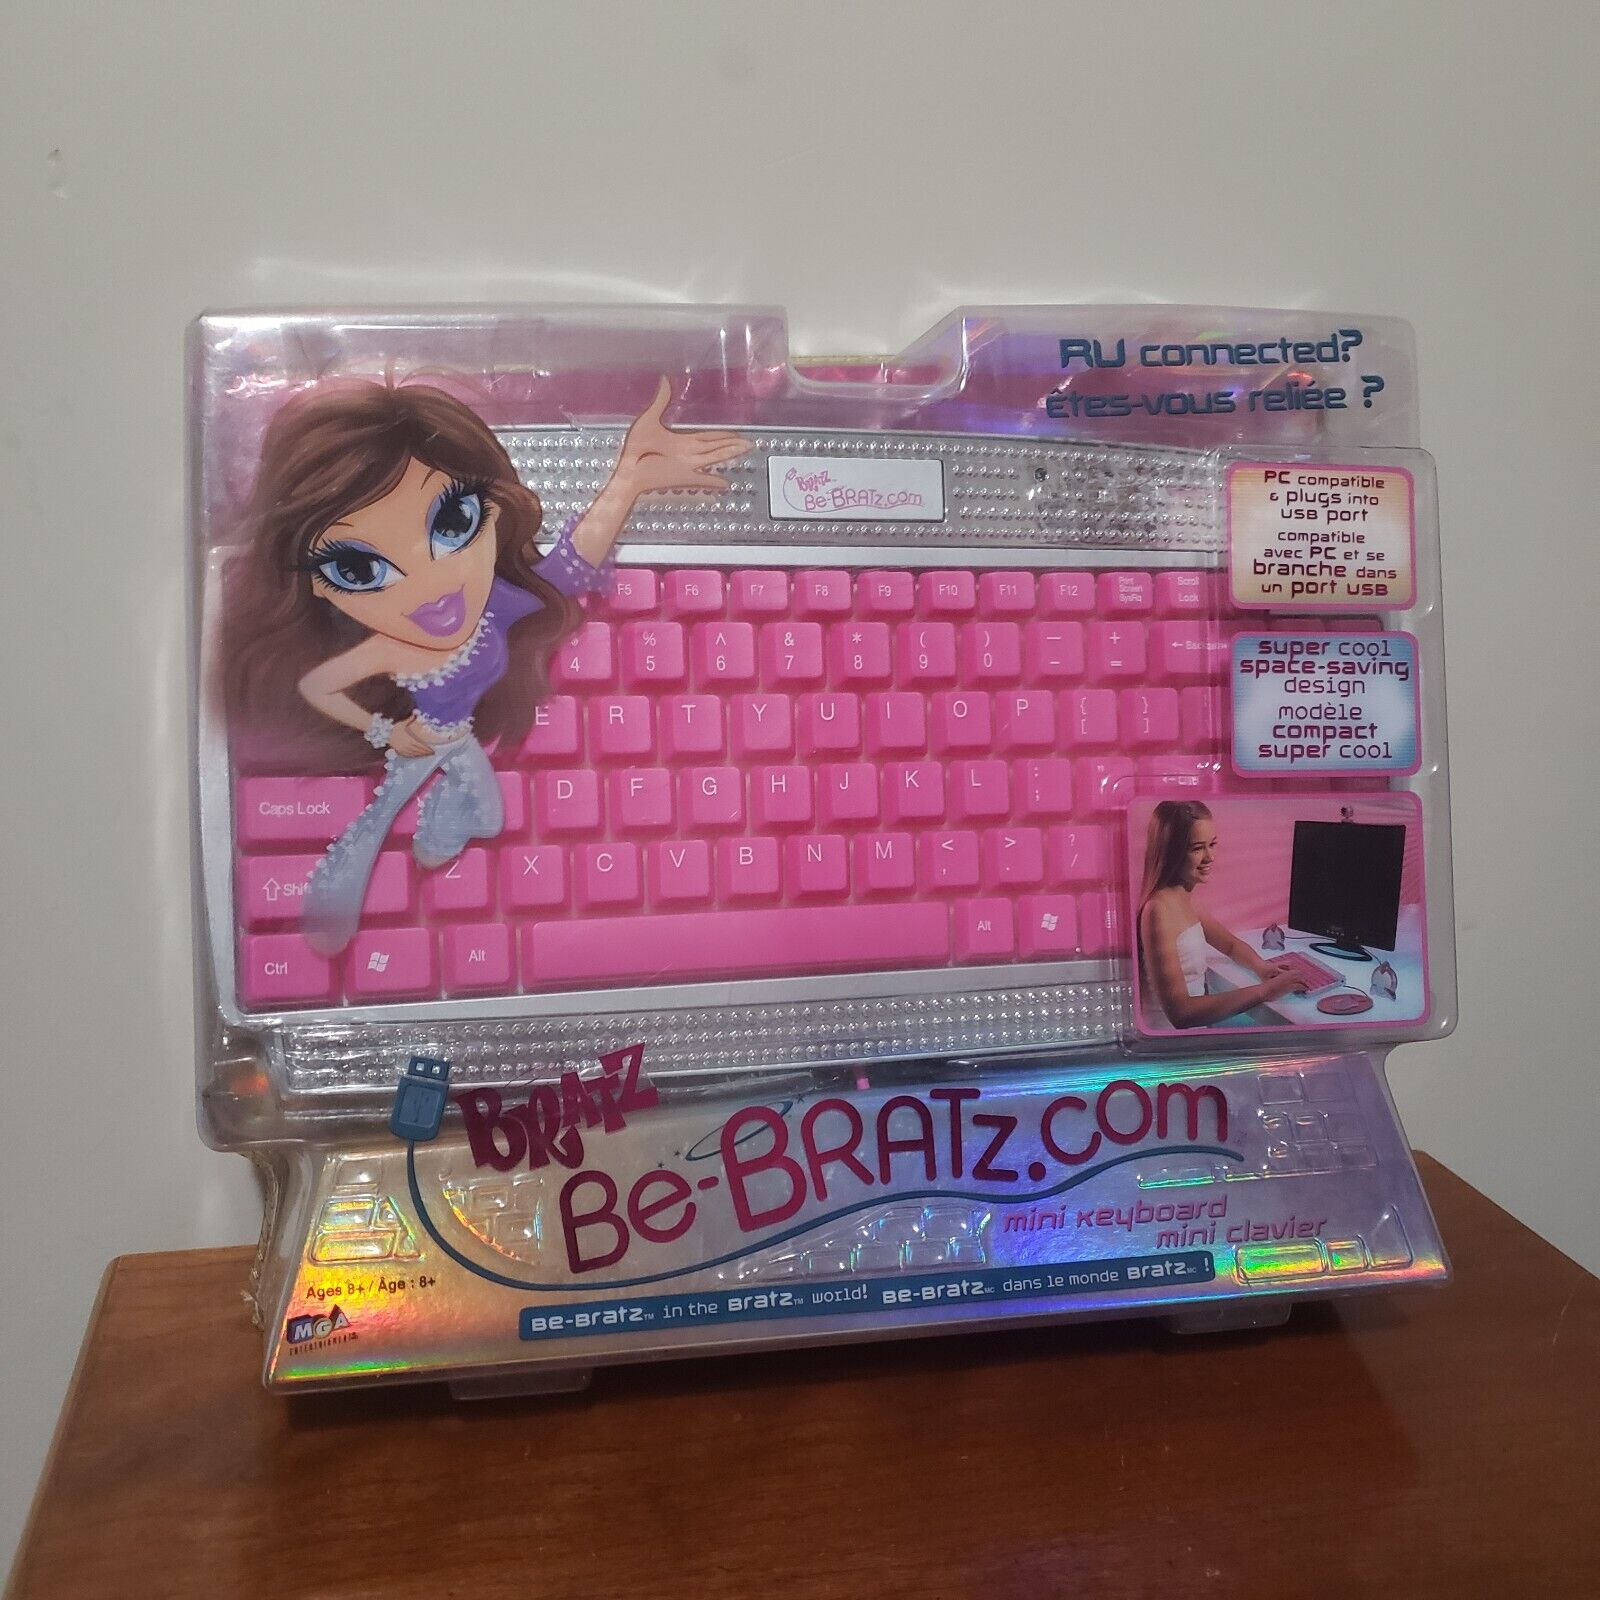 Bratz Mini Keyboard for PC New In Package Pink  Be-Bratz.com Doll RARE